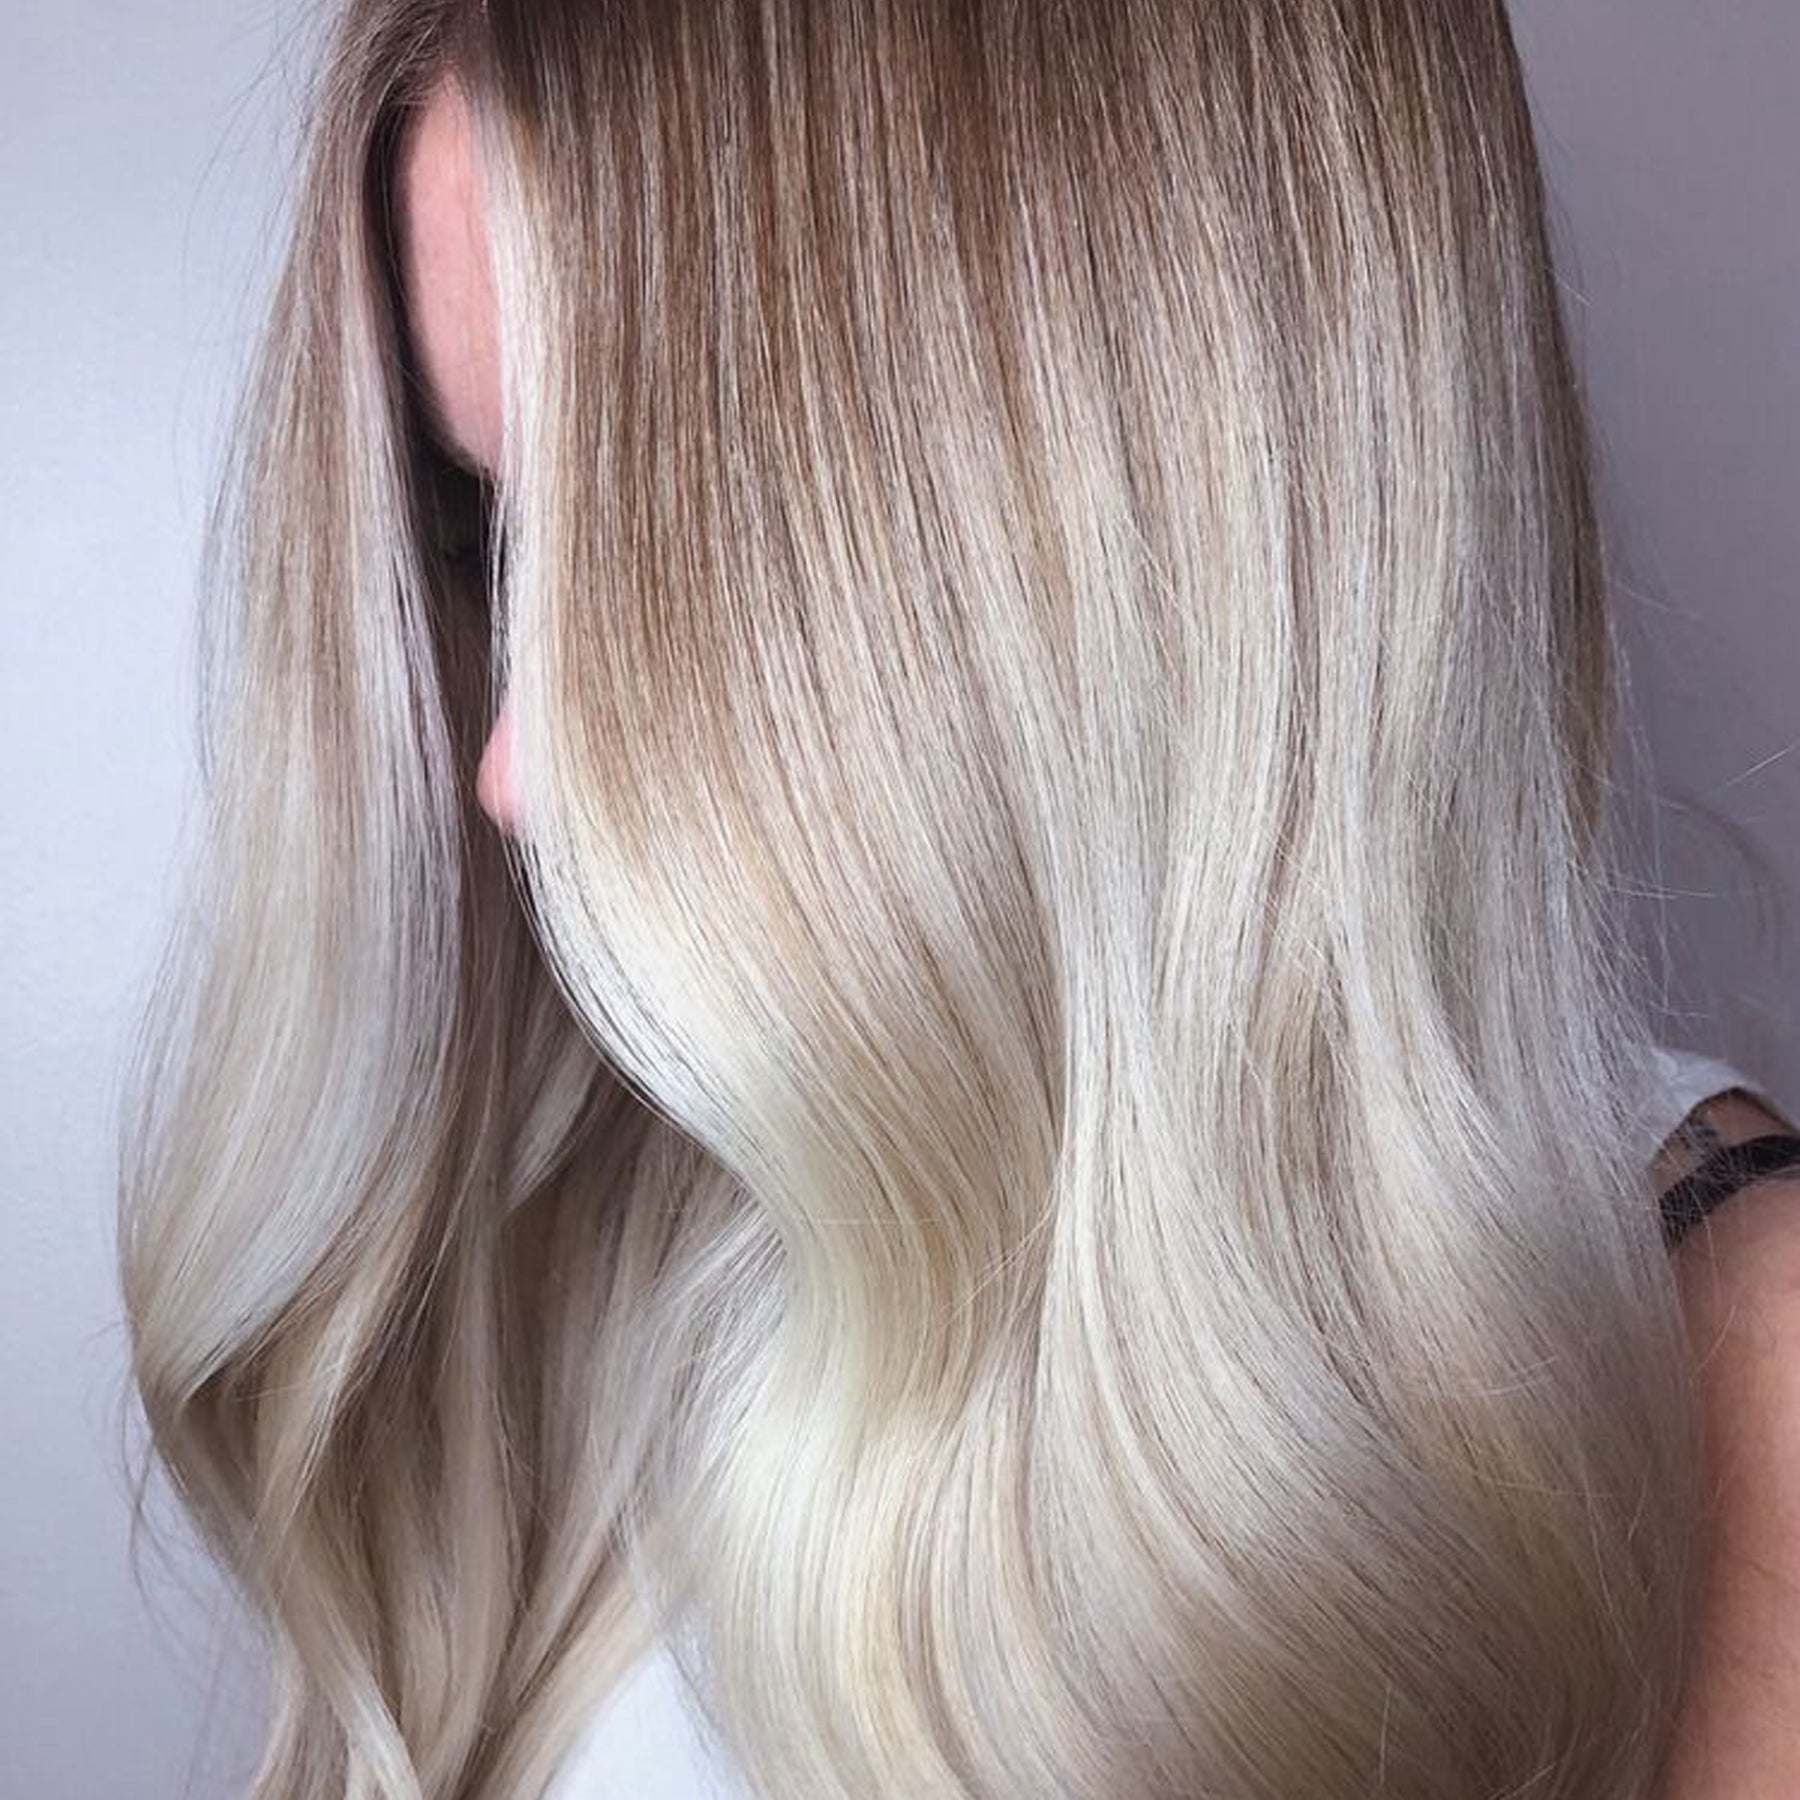 Woman blonde hair after using Olaplex No. 6 Bond Smoother.